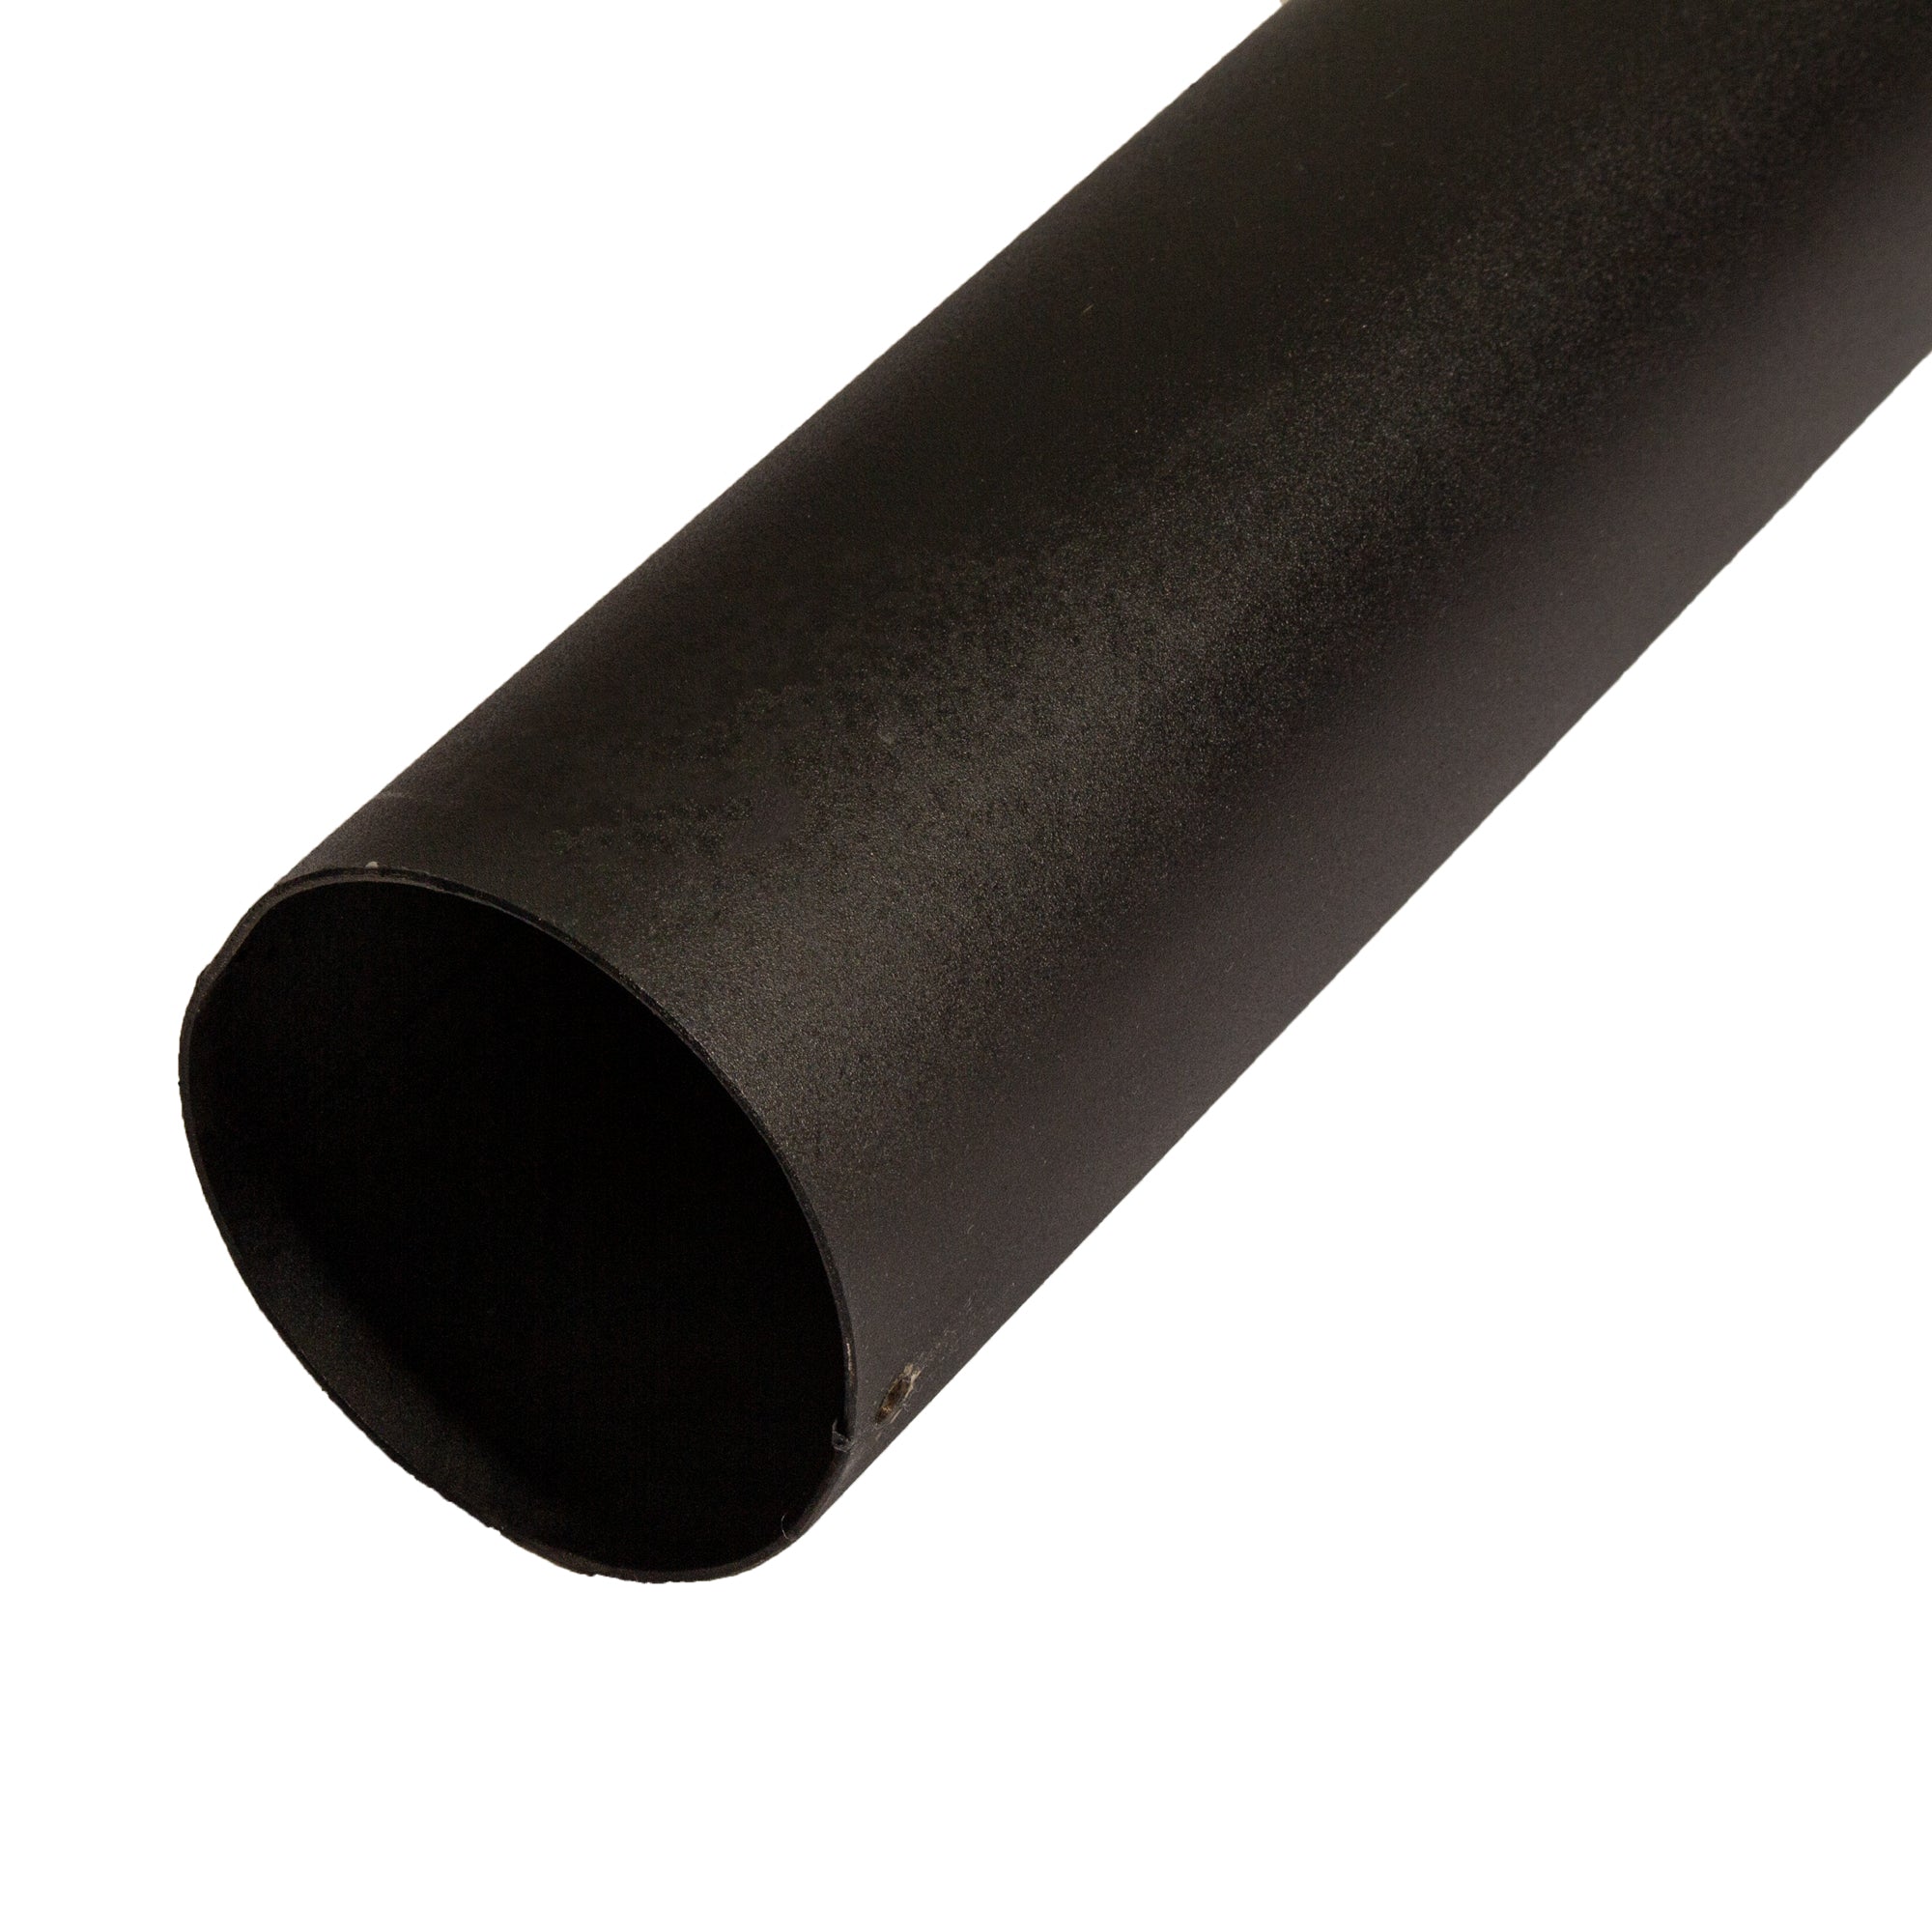 Exhaust Pipe Stack Replacement UNIVERSAL - 3-1/2" x 96", Straight Black